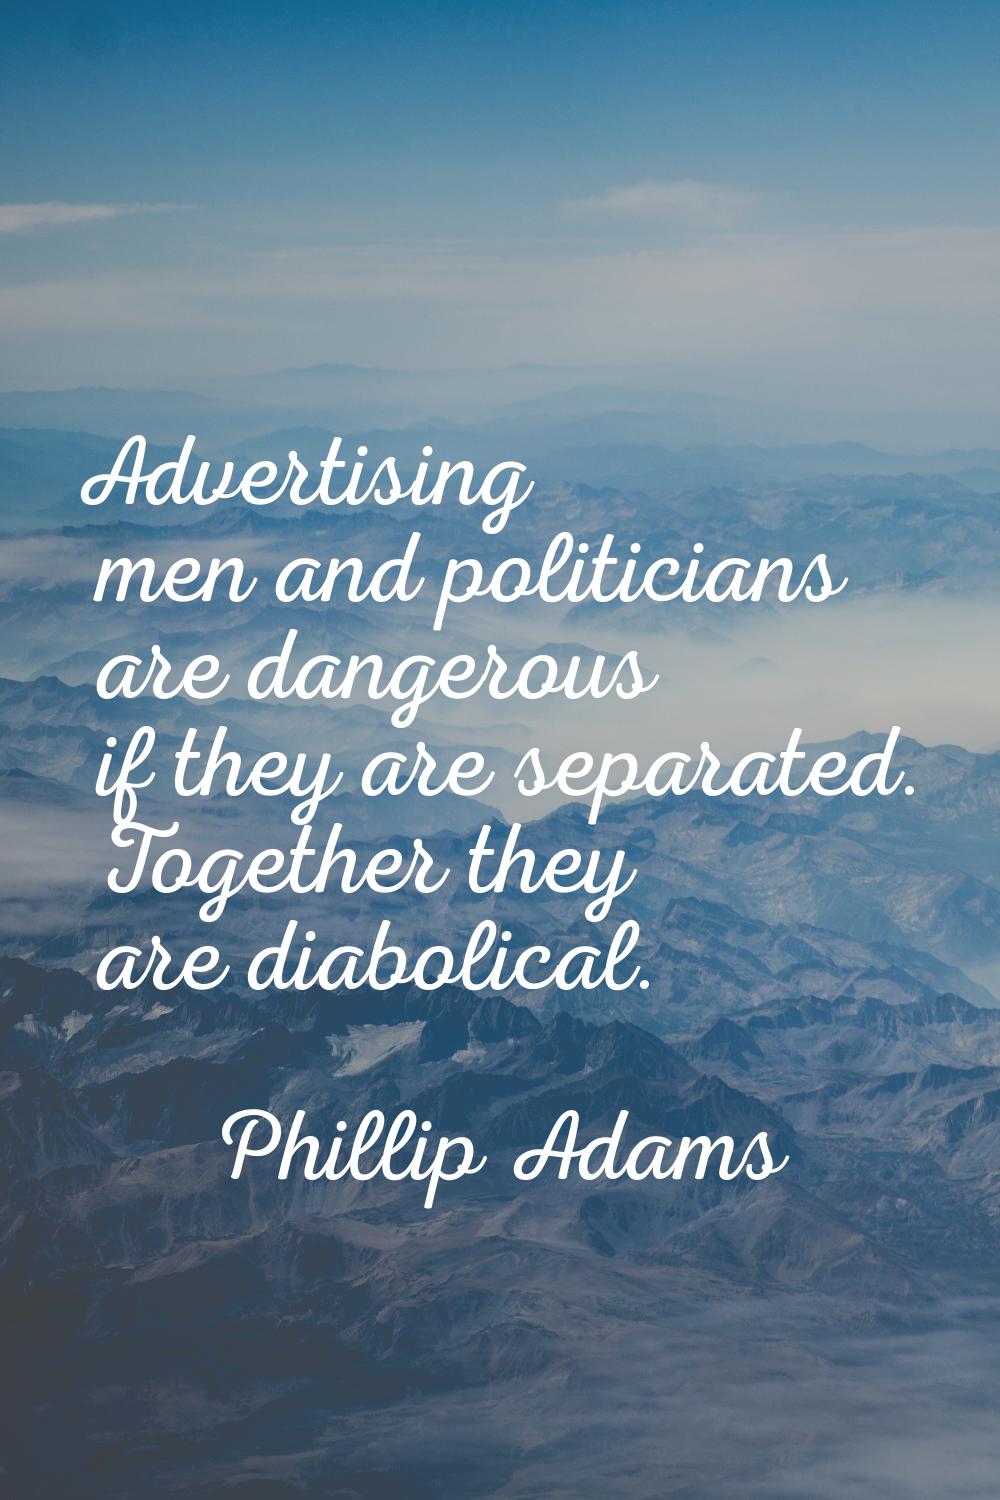 Advertising men and politicians are dangerous if they are separated. Together they are diabolical.